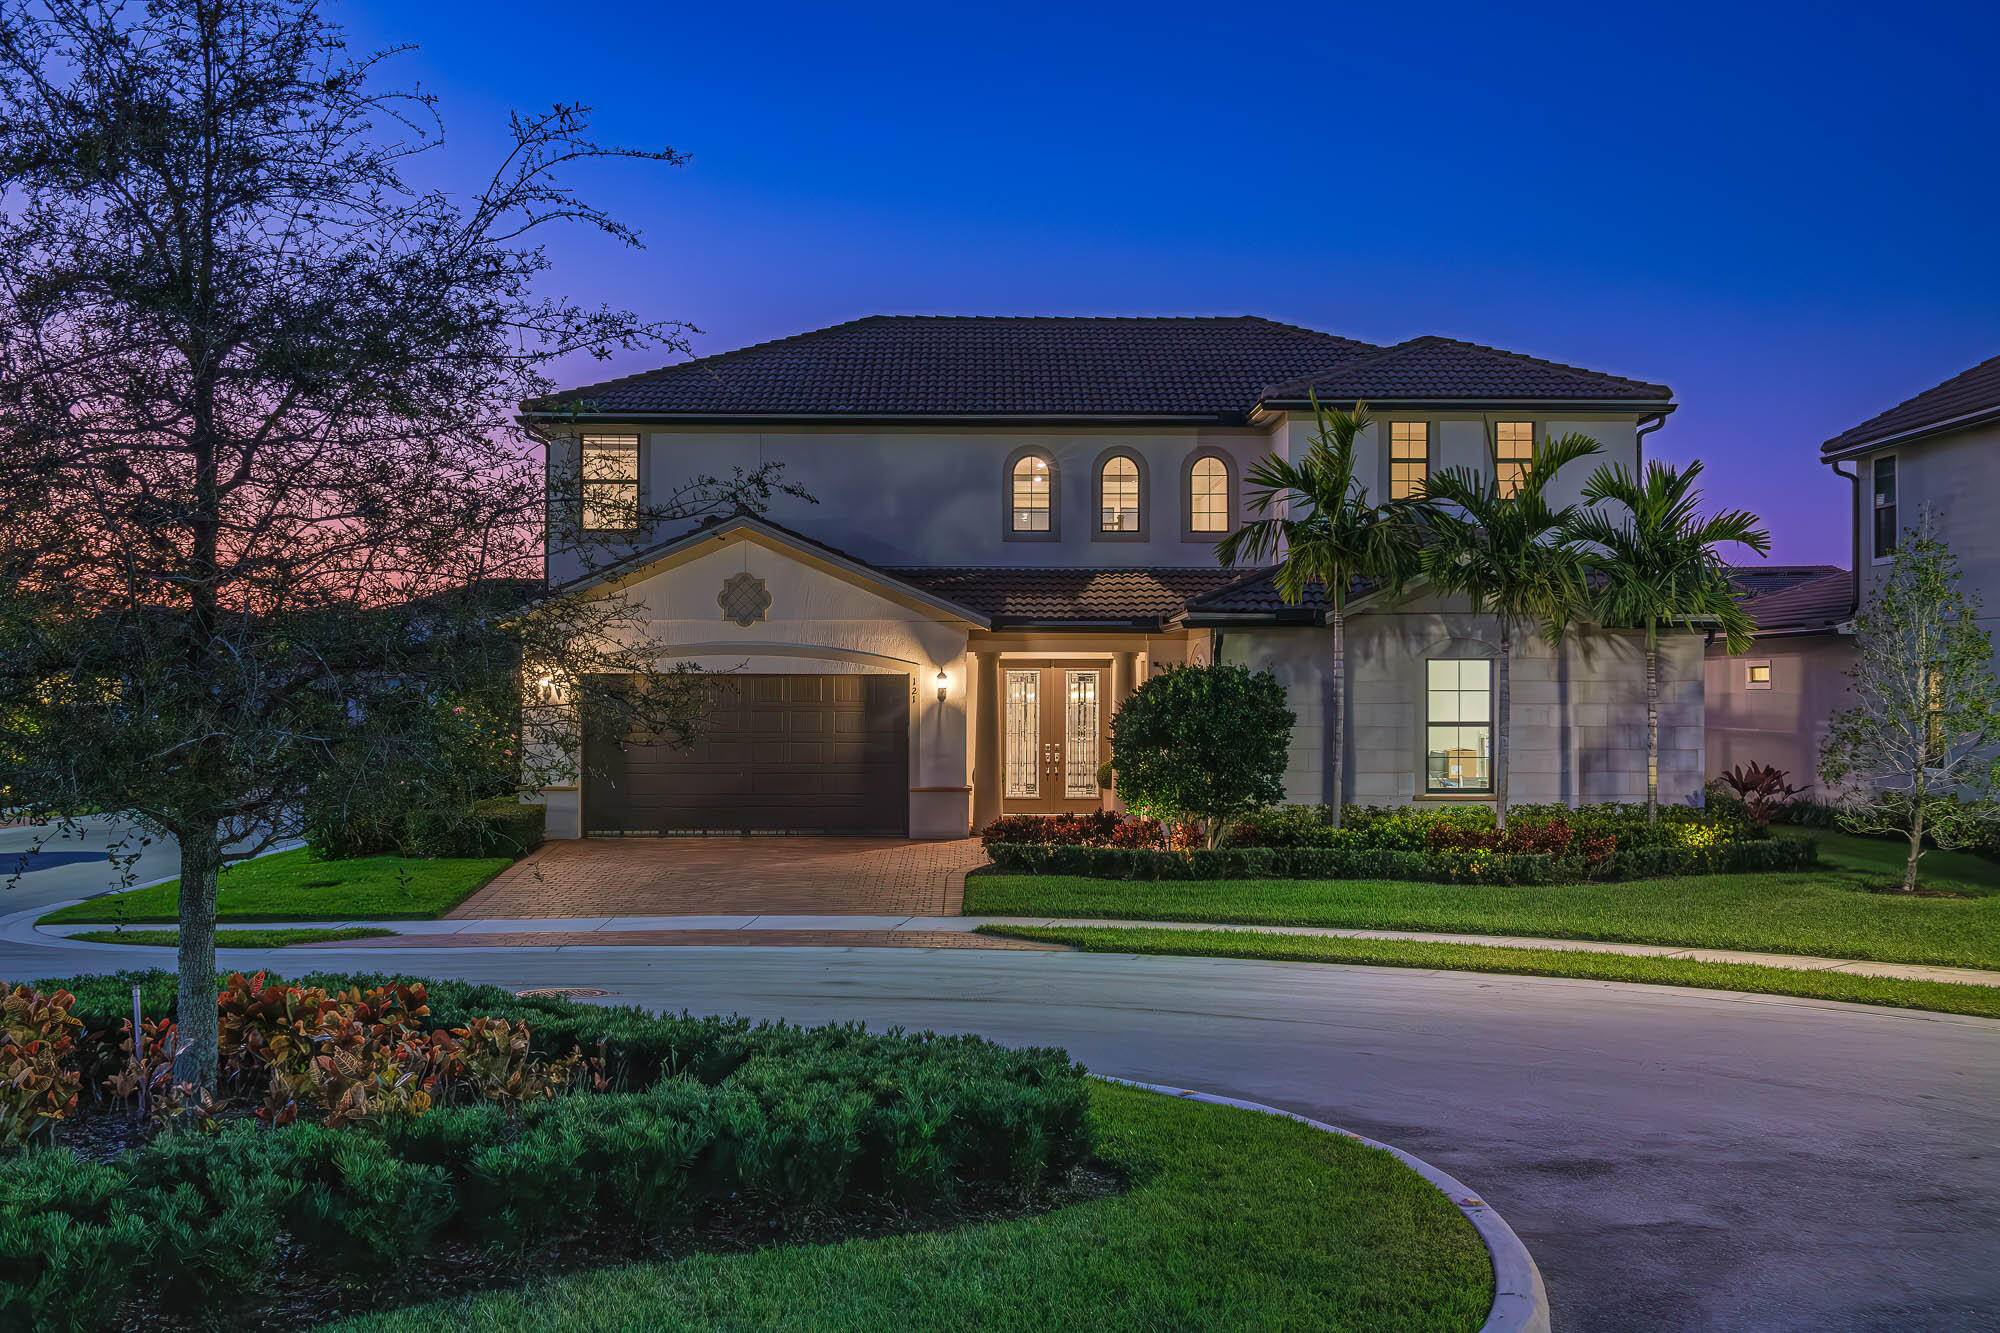 Luxury Living in the Gated Sonoma Isles, in JupiterThis stunning 5 bedrooms, 6.